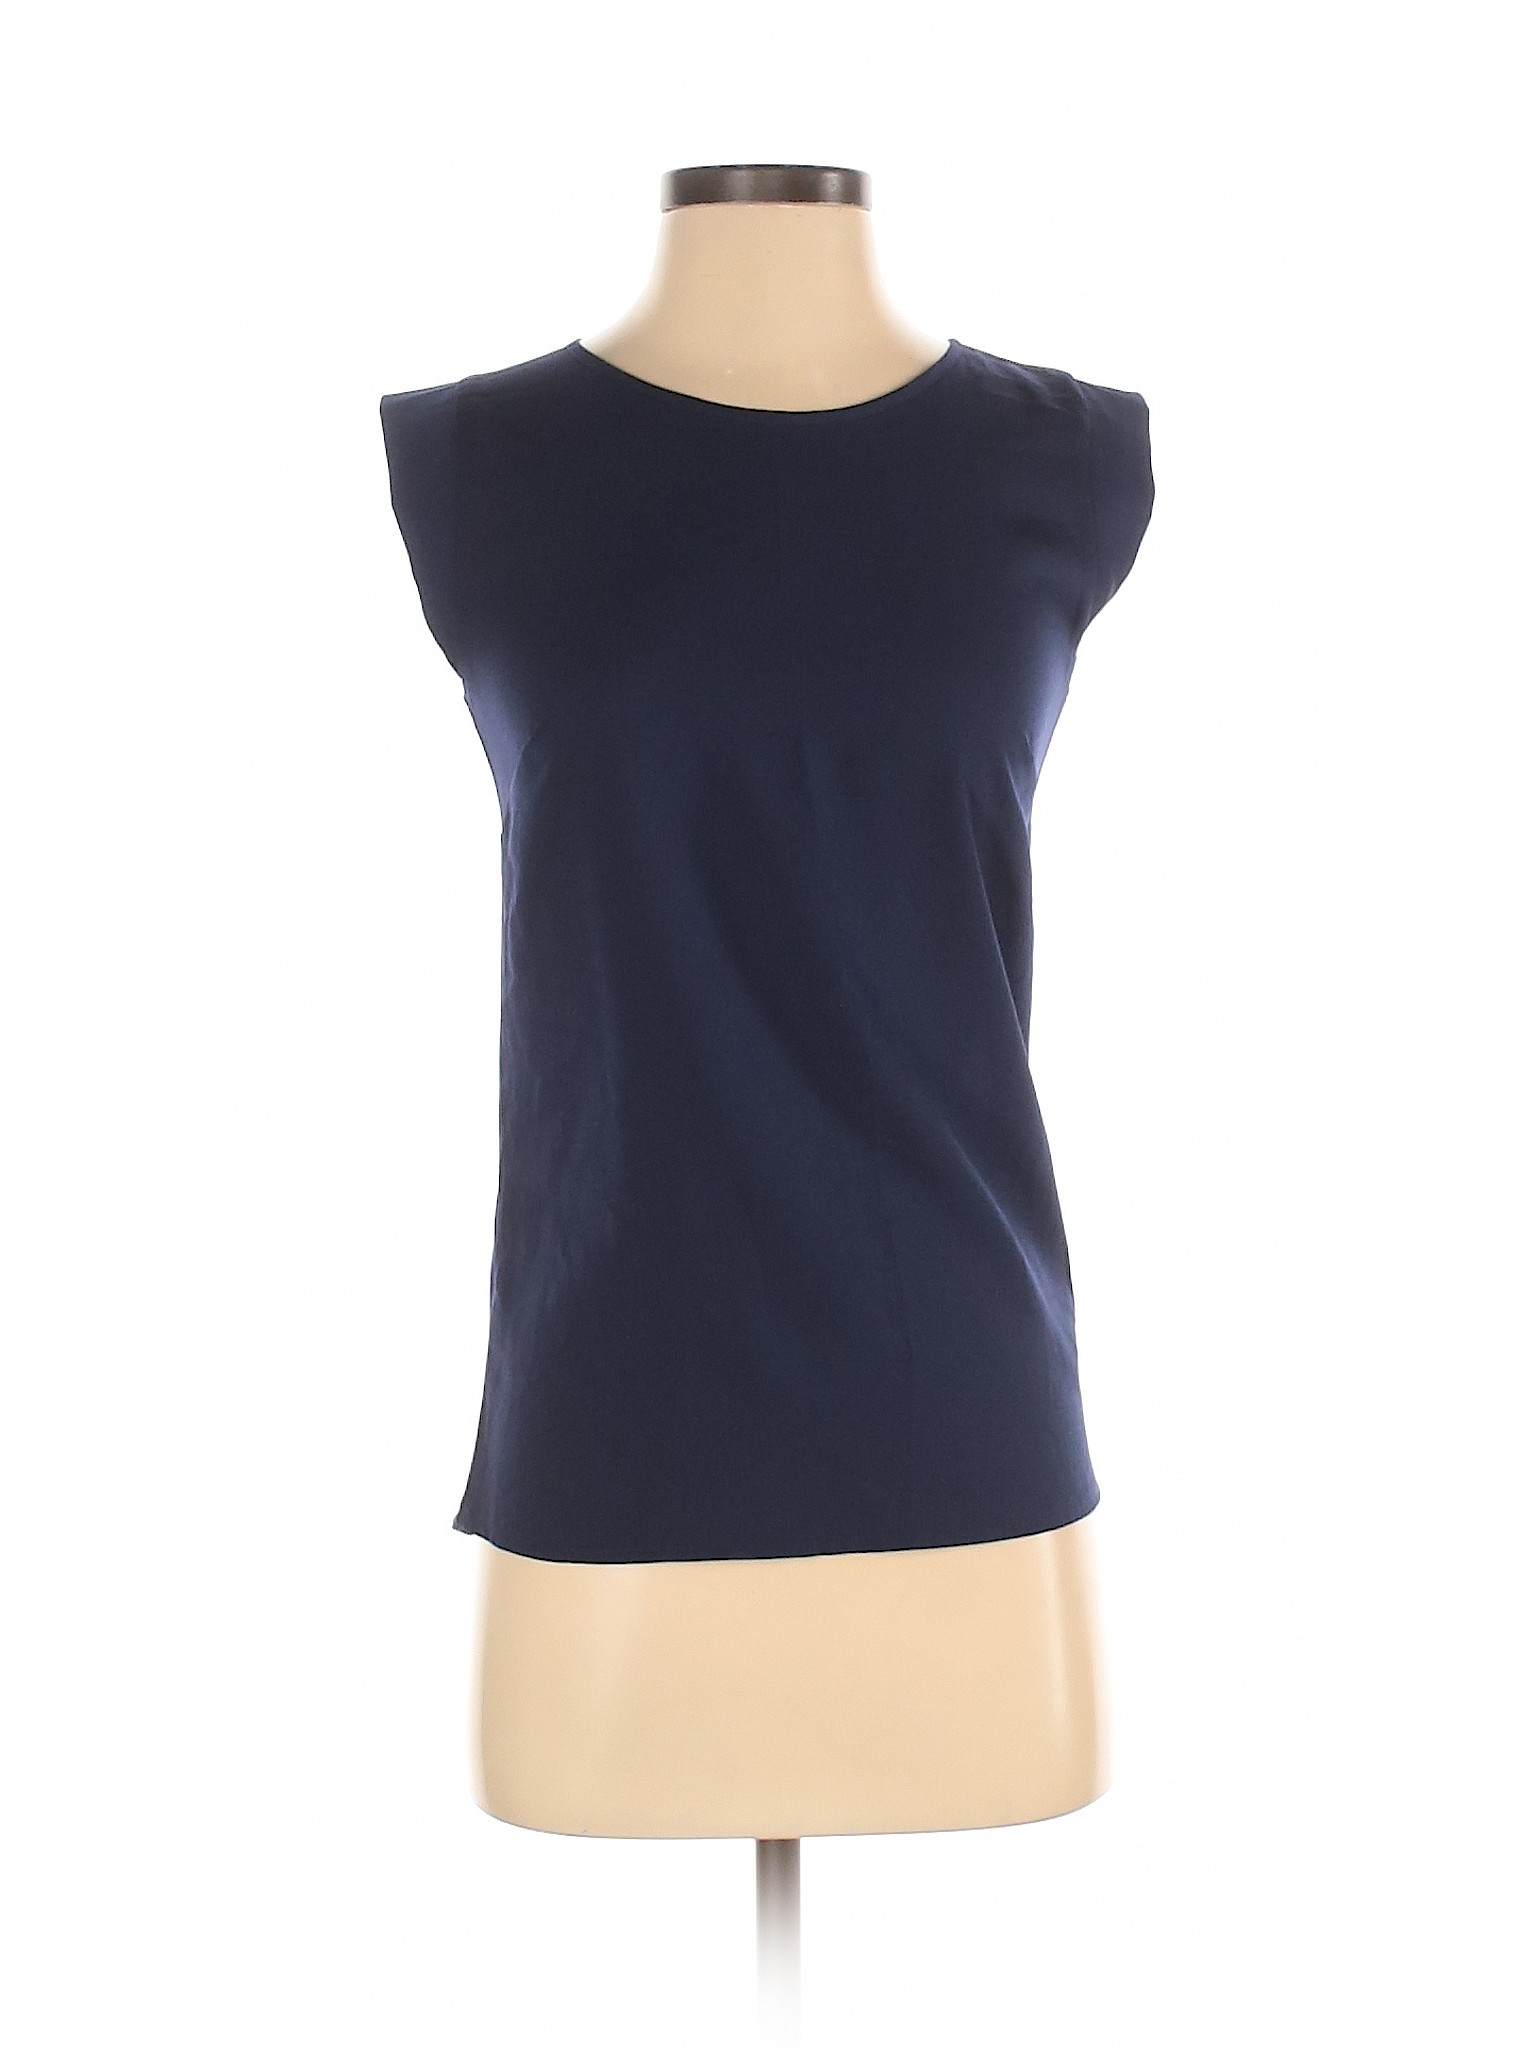 French Connection Women Blue Short Sleeve Blouse XS 889042803257 | eBay